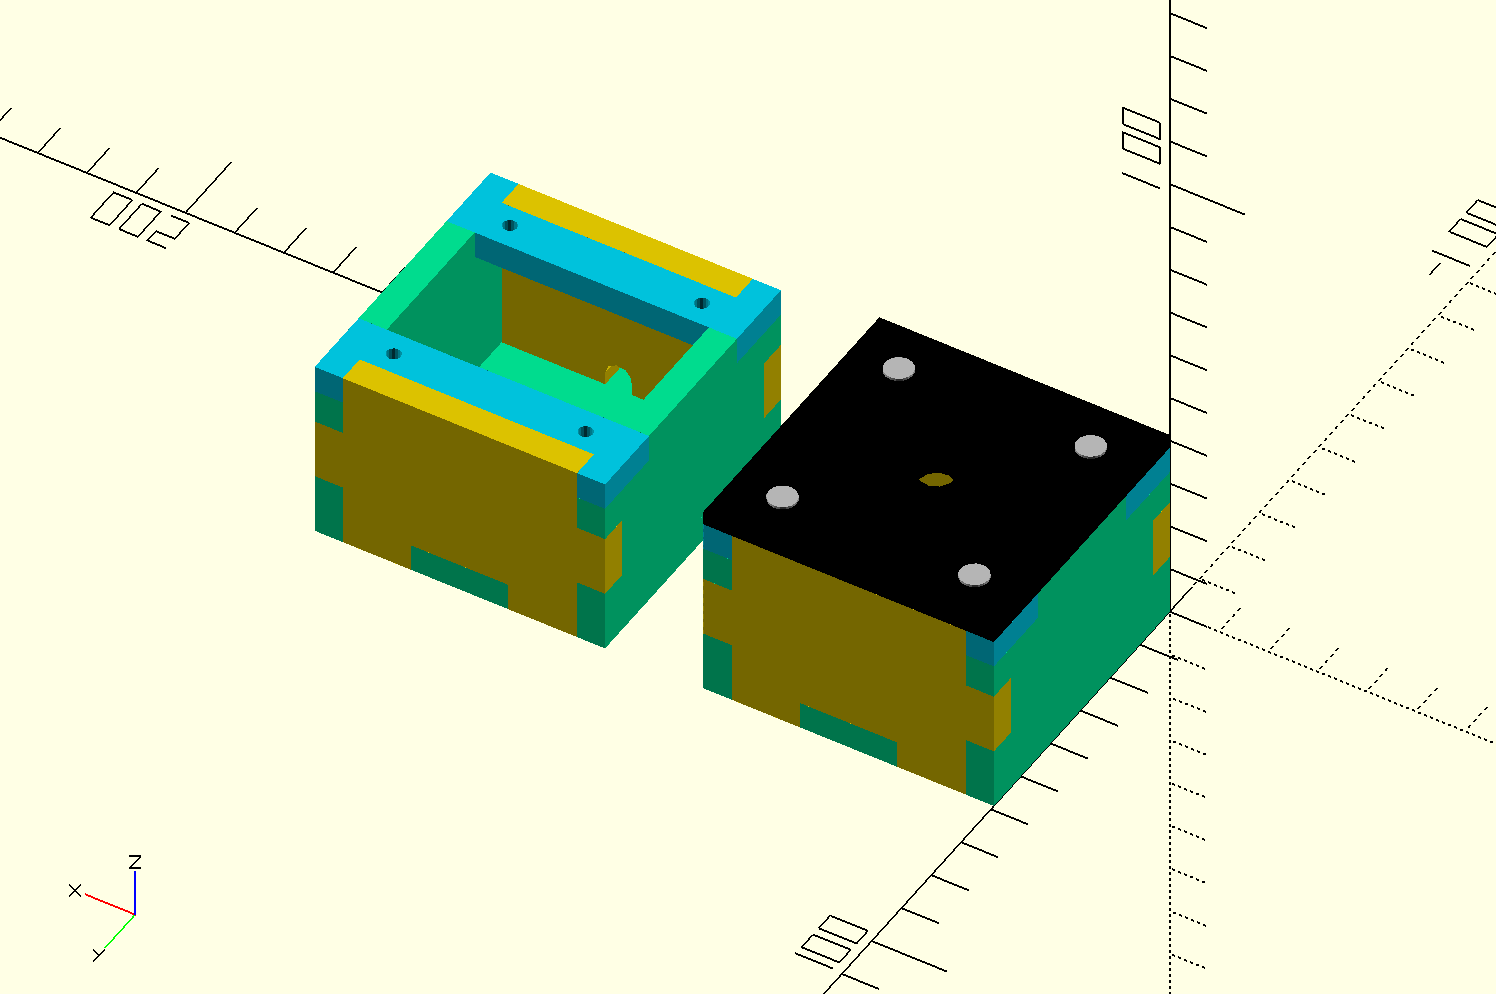 OpenSCAD render of knobbox v2 in 3d and 2d layout